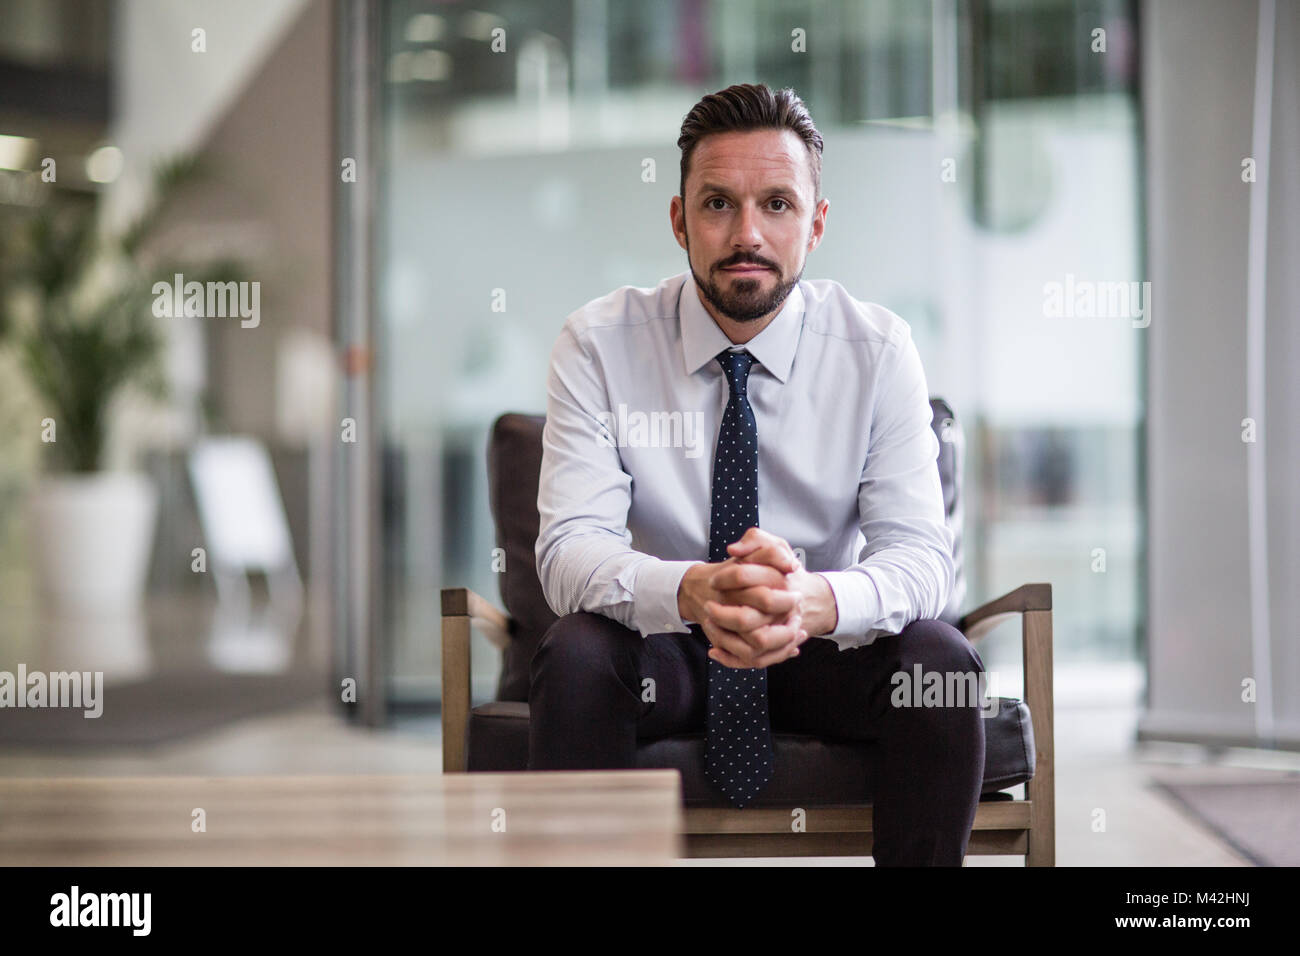 Businessman looking confidently to camera Stock Photo